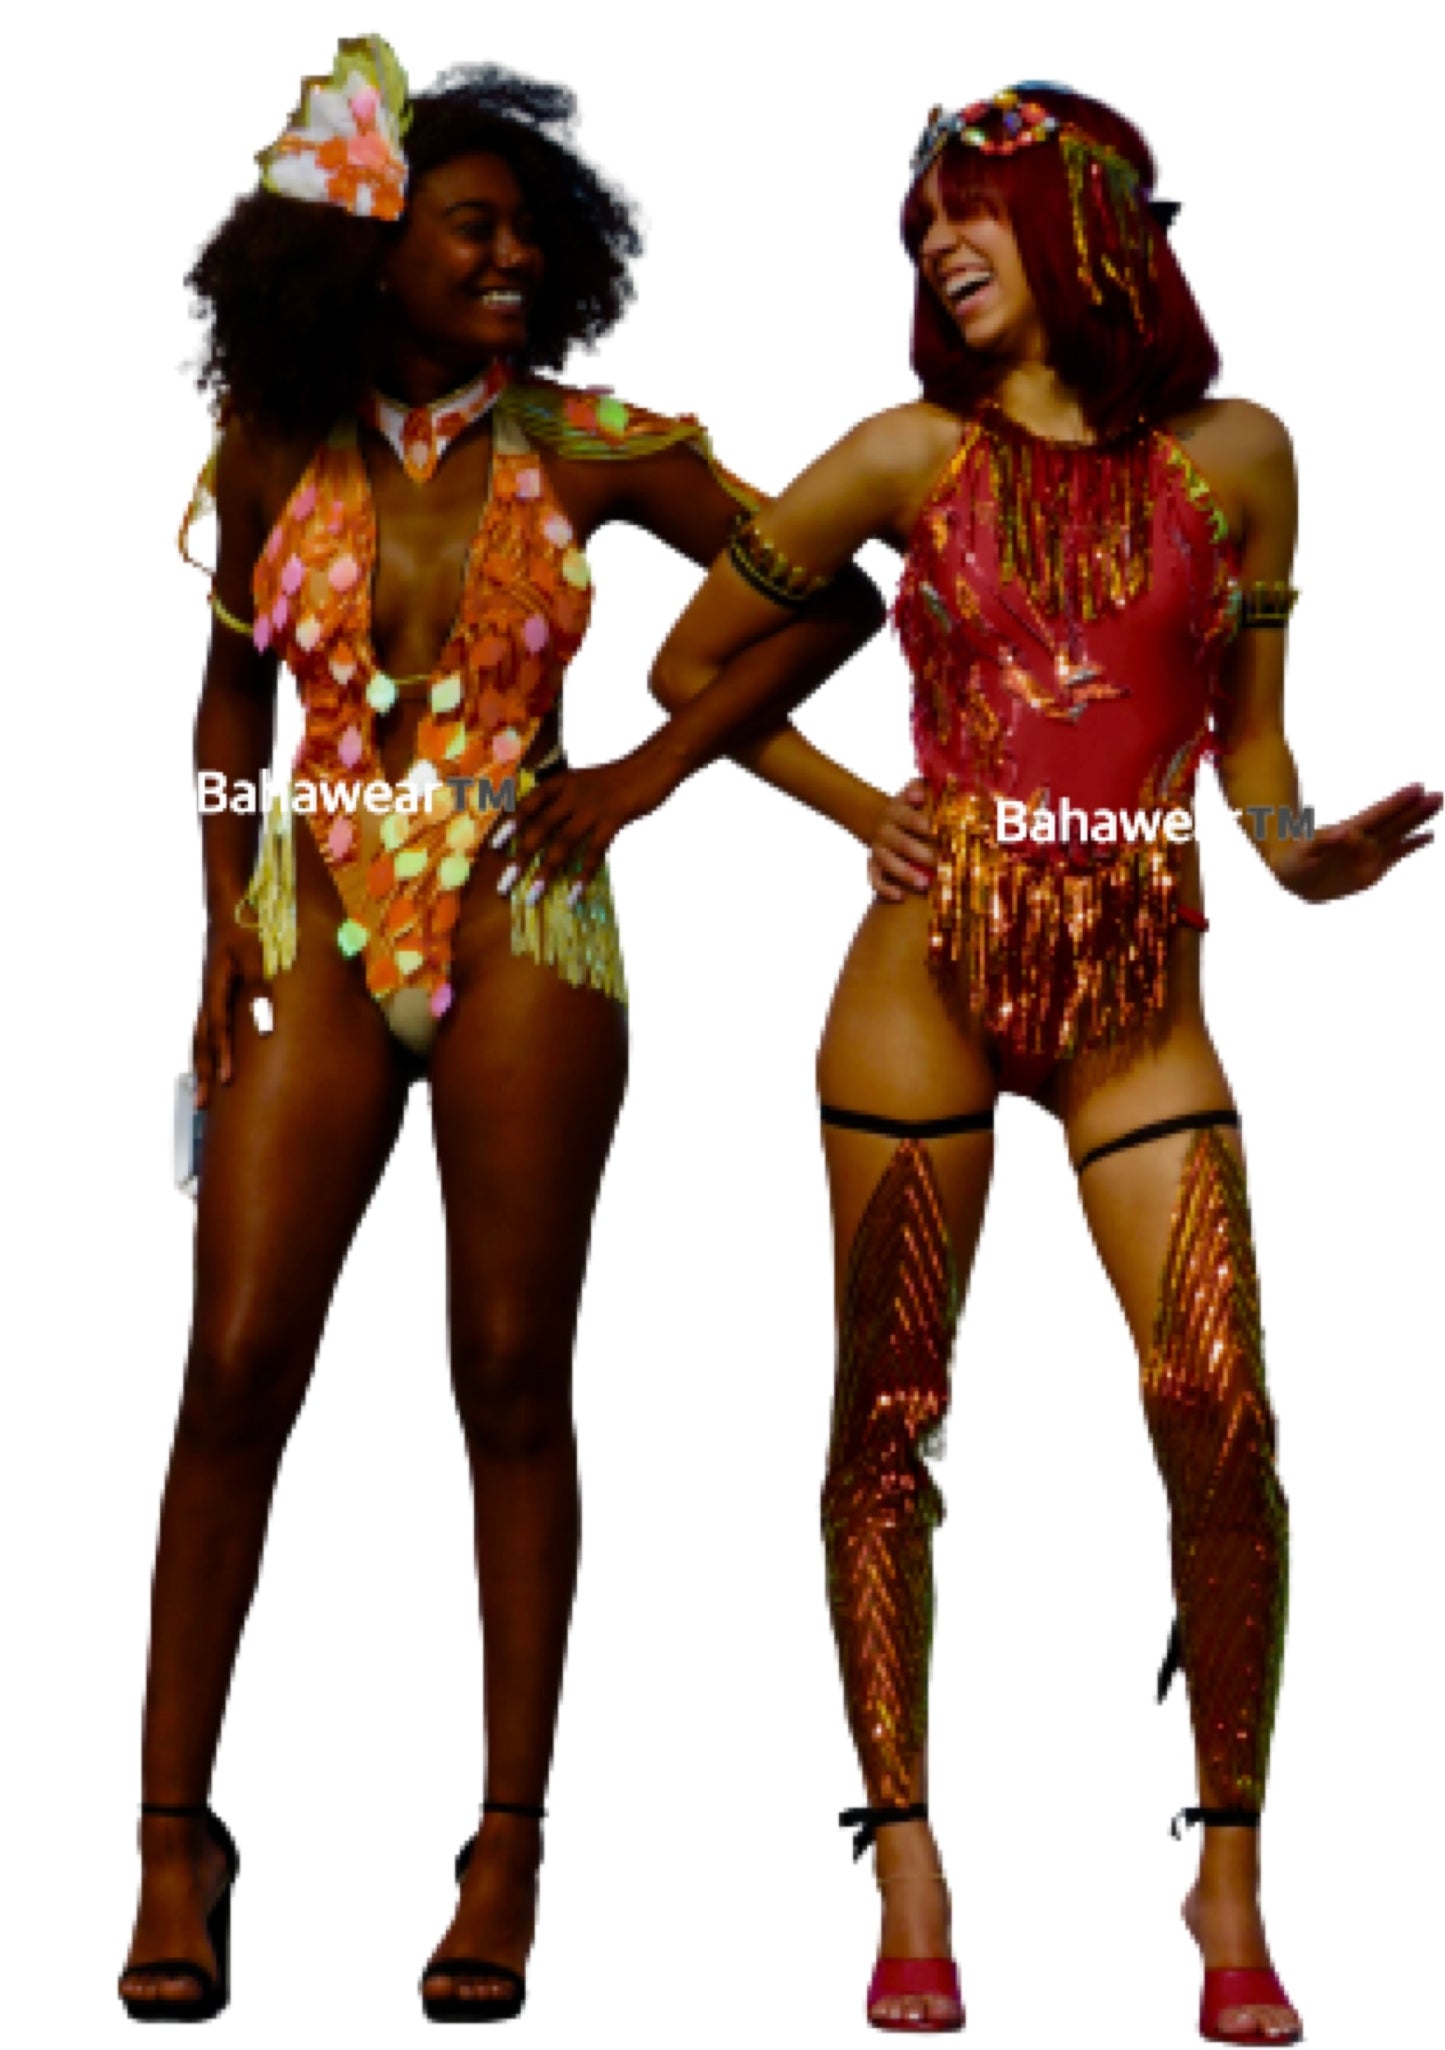 "Ms. Red Hot" Costume by Bahawear™